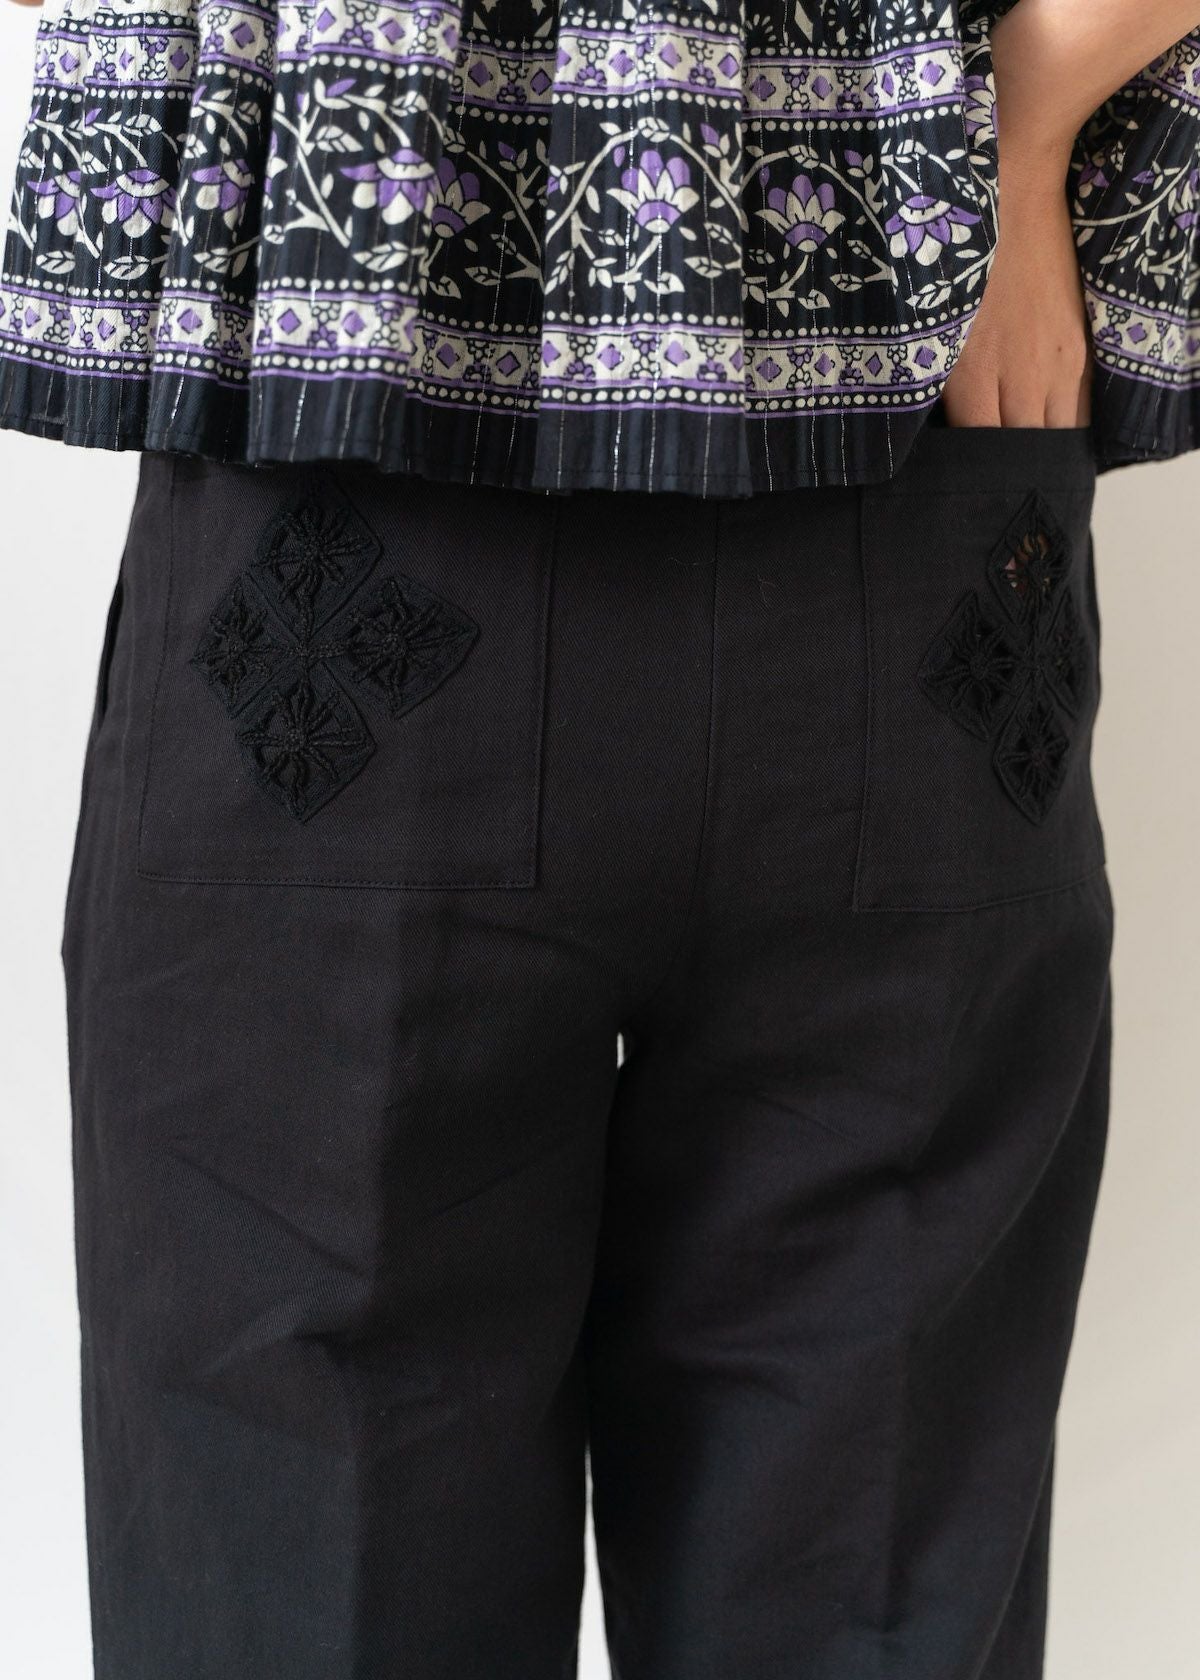 Cotton Linen Tape Embroidery Cutwork Pants